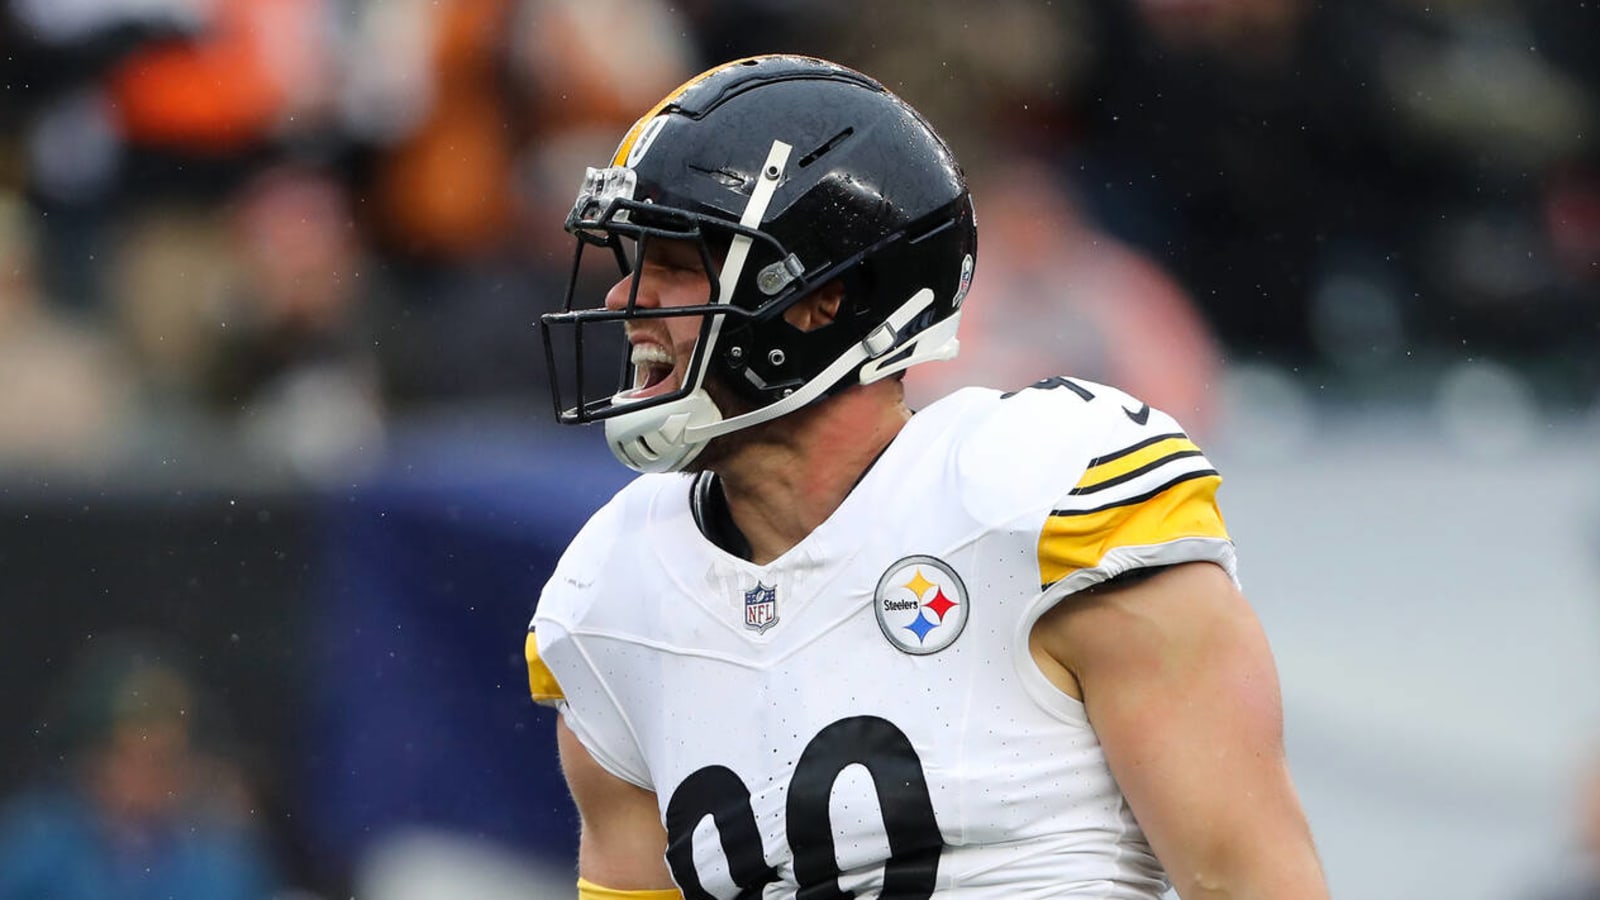 Steelers And The NFL Completely Insensitive To TJ Watt's Overall Health And Well-Being